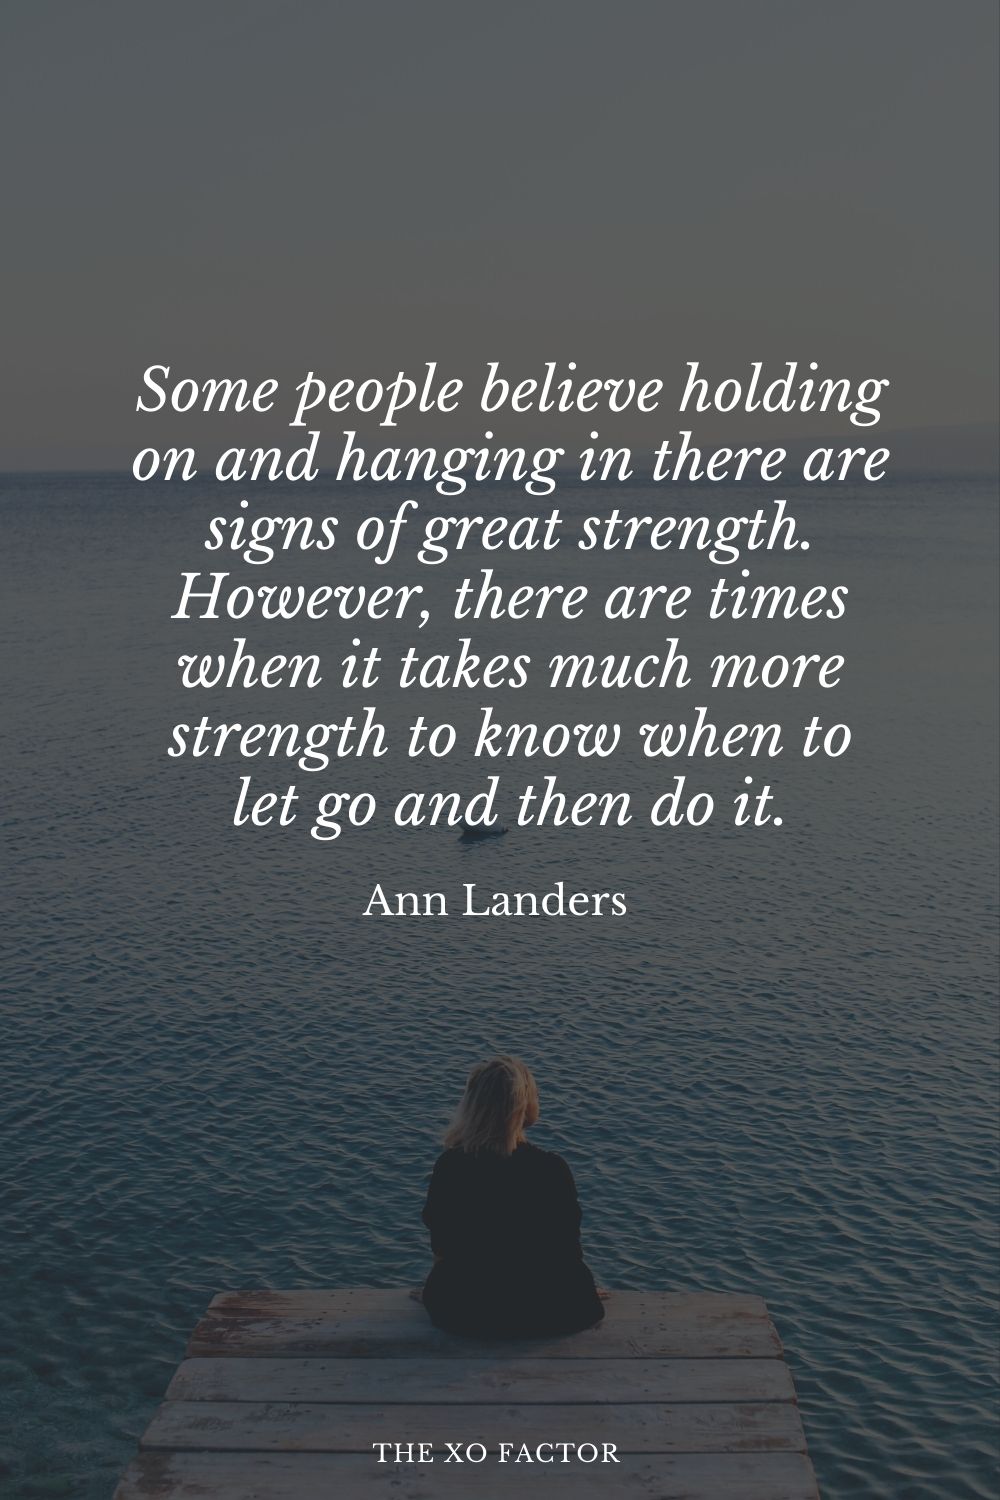 Some people believe holding on and hanging in there are signs of great strength. However, there are times when it takes much more strength to know when to let go and then do it.” Ann Landers